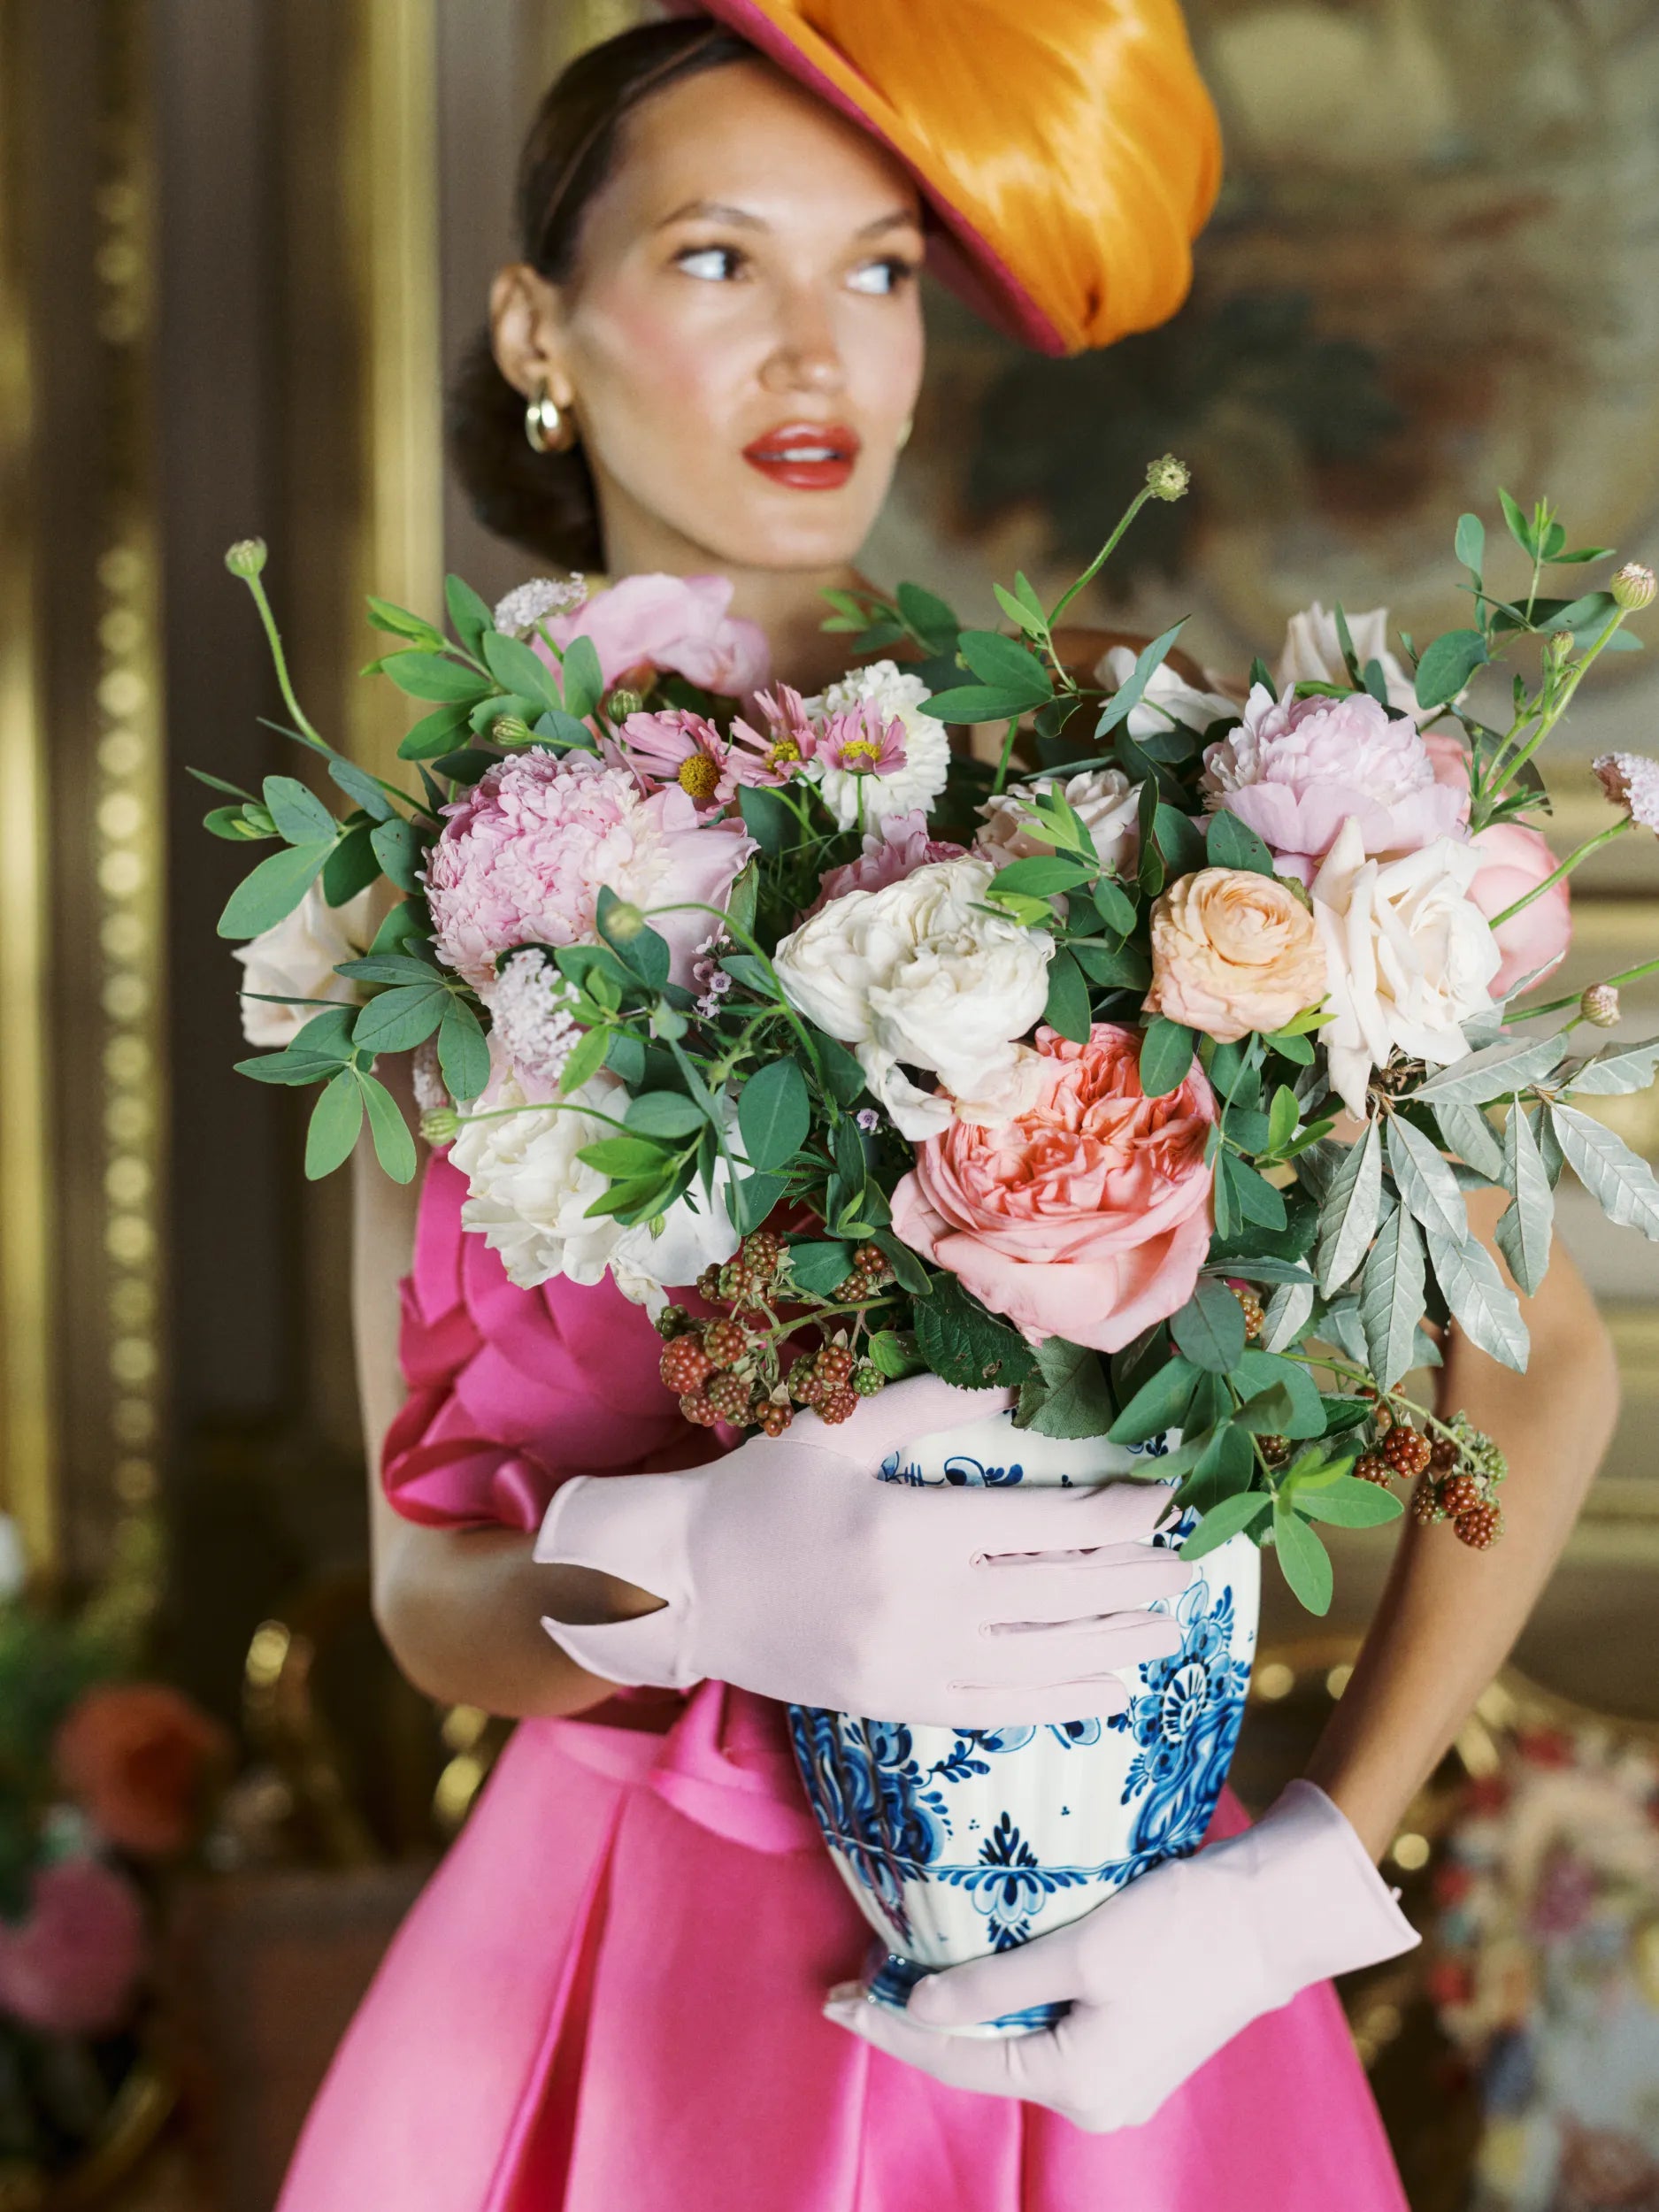 Woman looking away, wearing light pink day gloves holding flower vase.